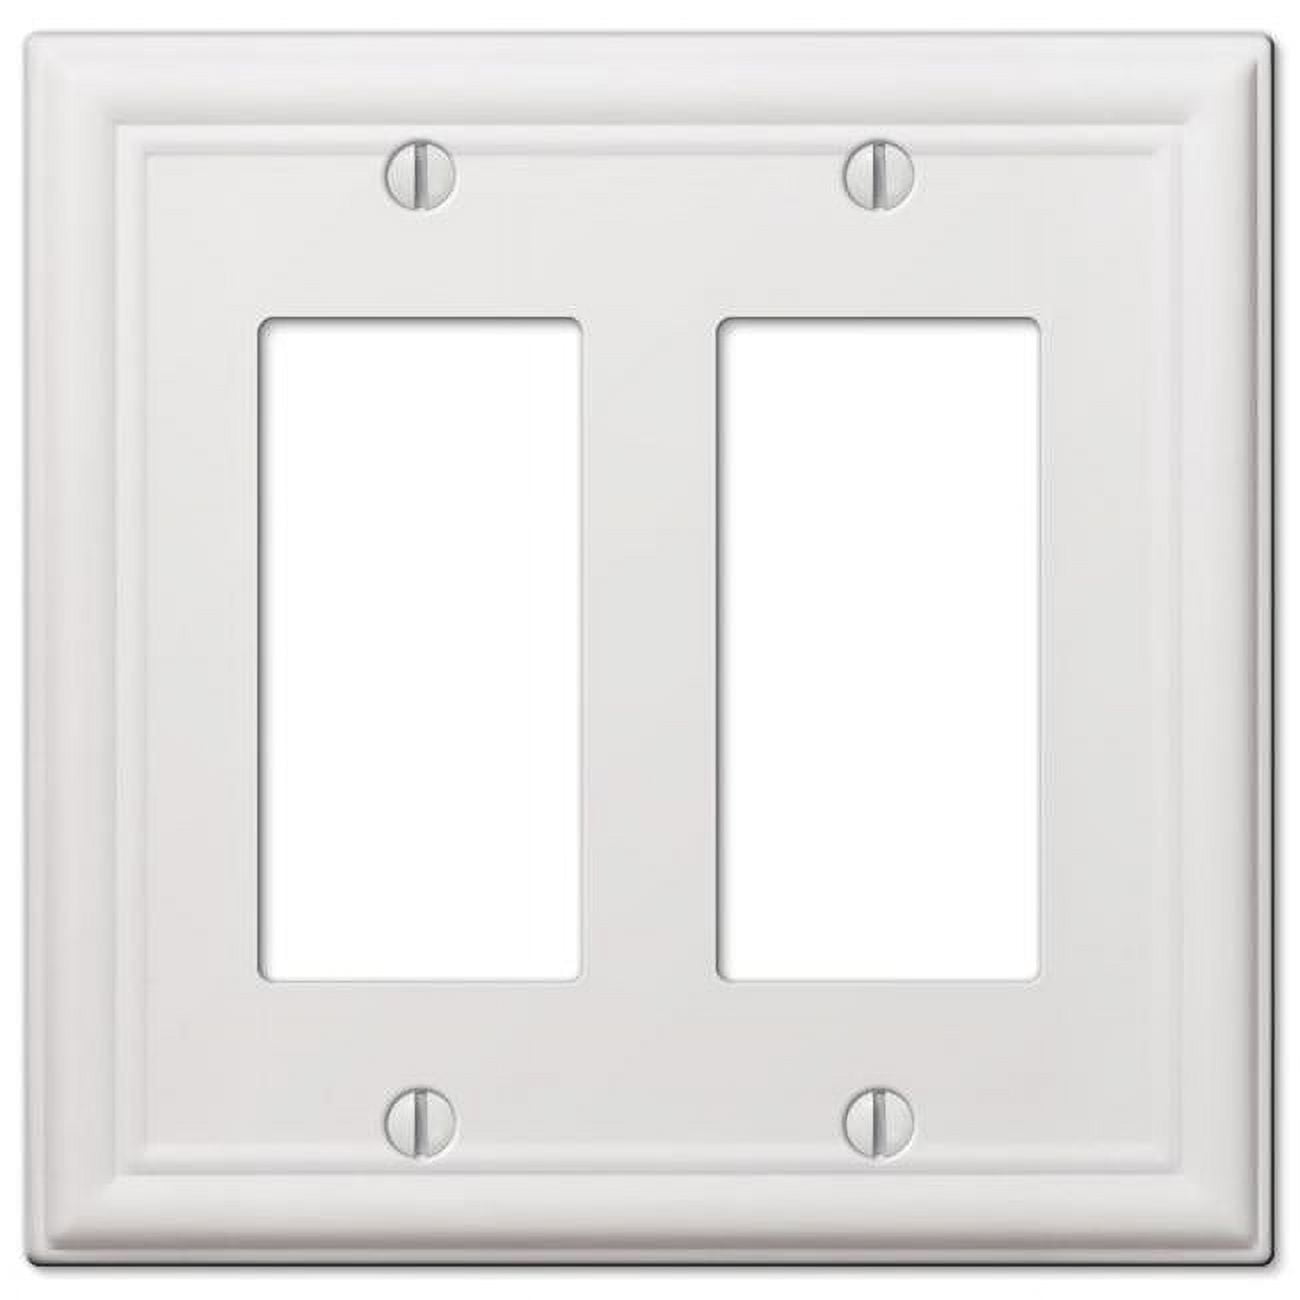 Picture of Amerelle 3003166 Chelsea White 2-Gang Stamped Steel Rocker Wall Plate